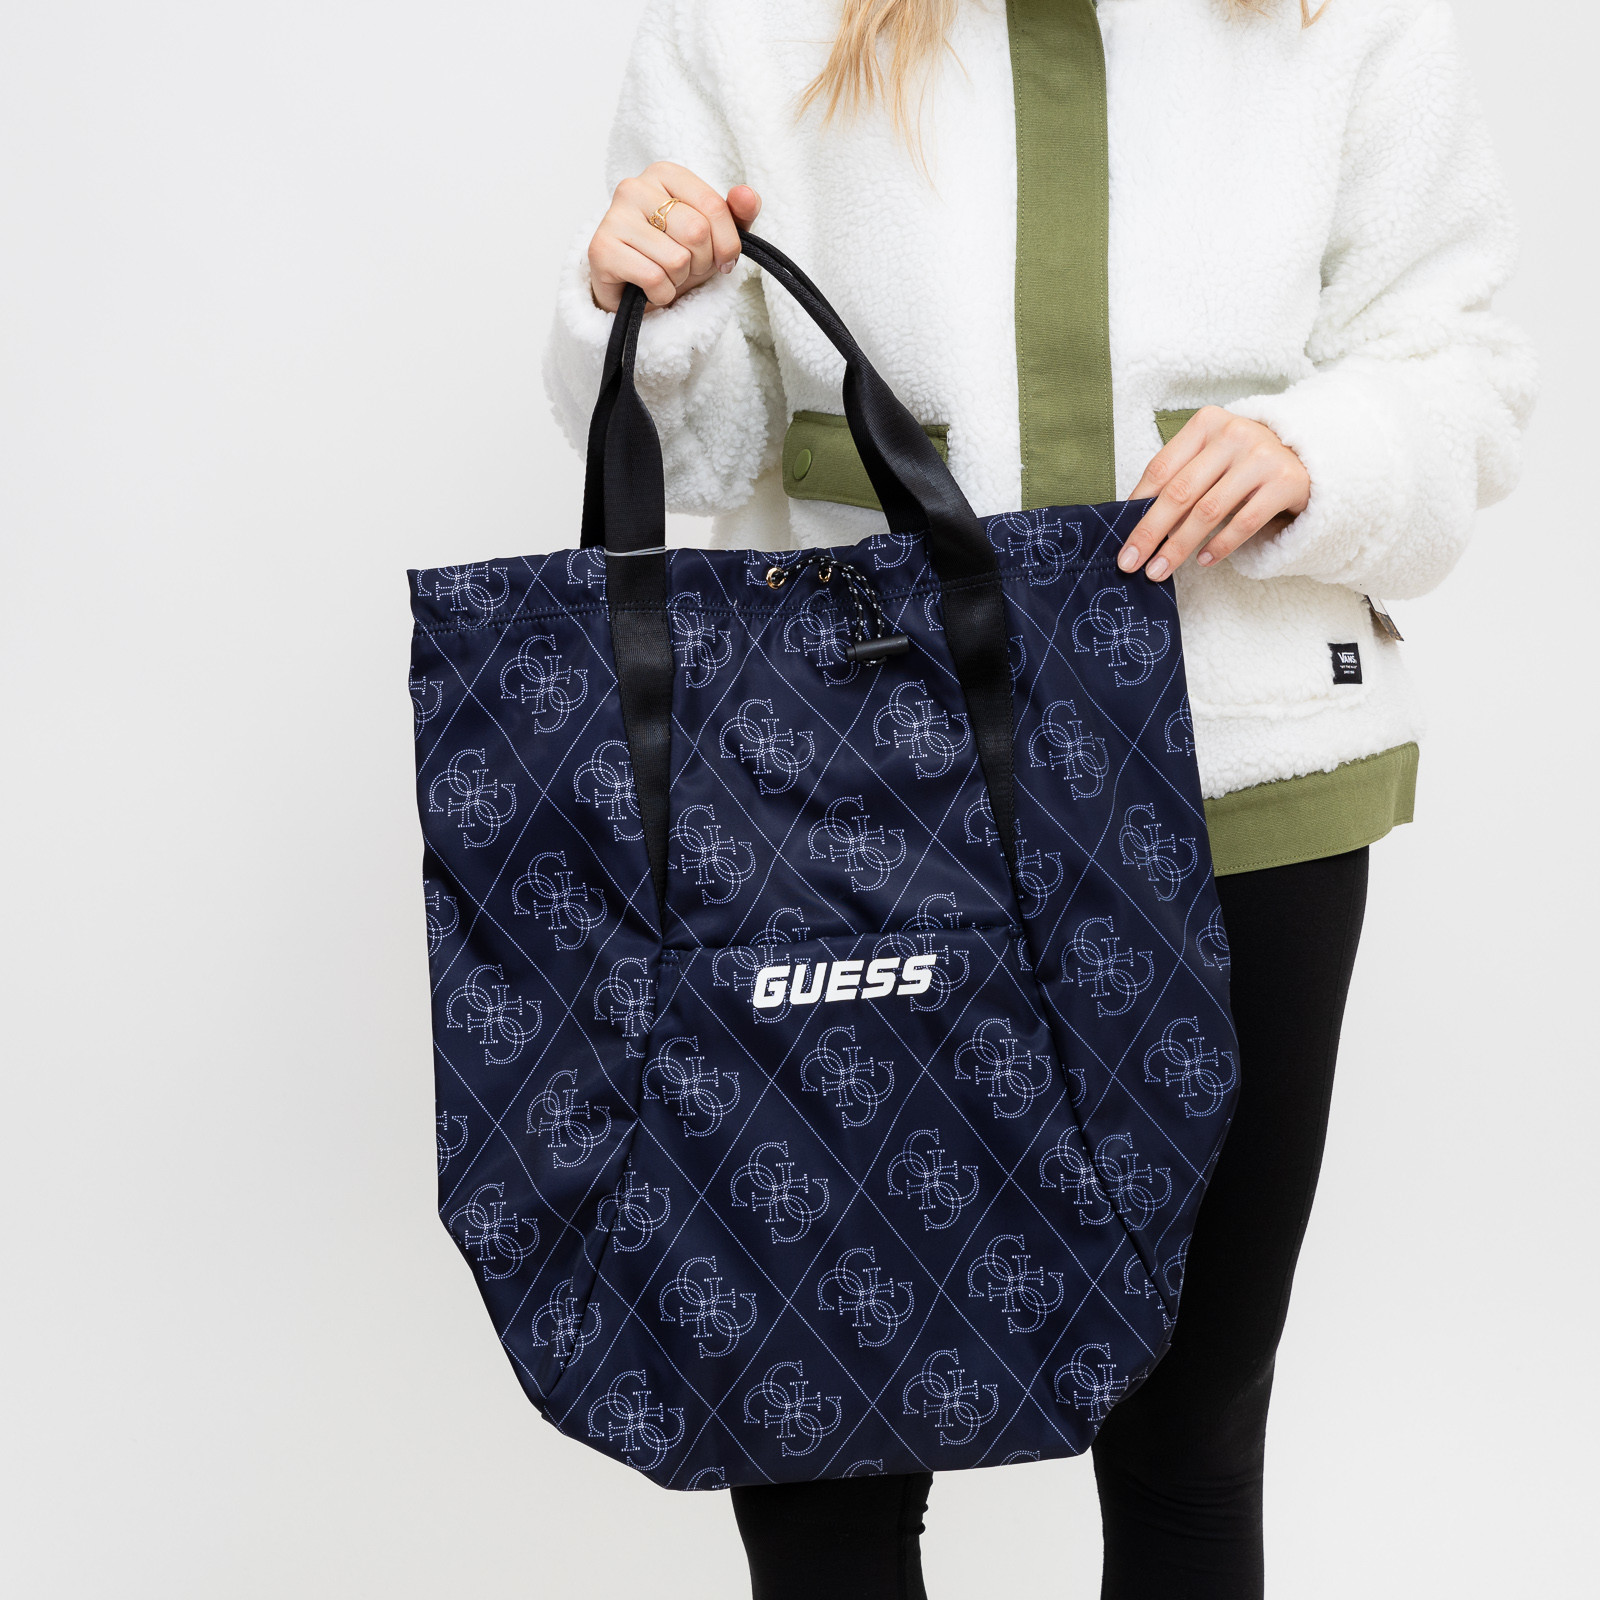 Guess bag one